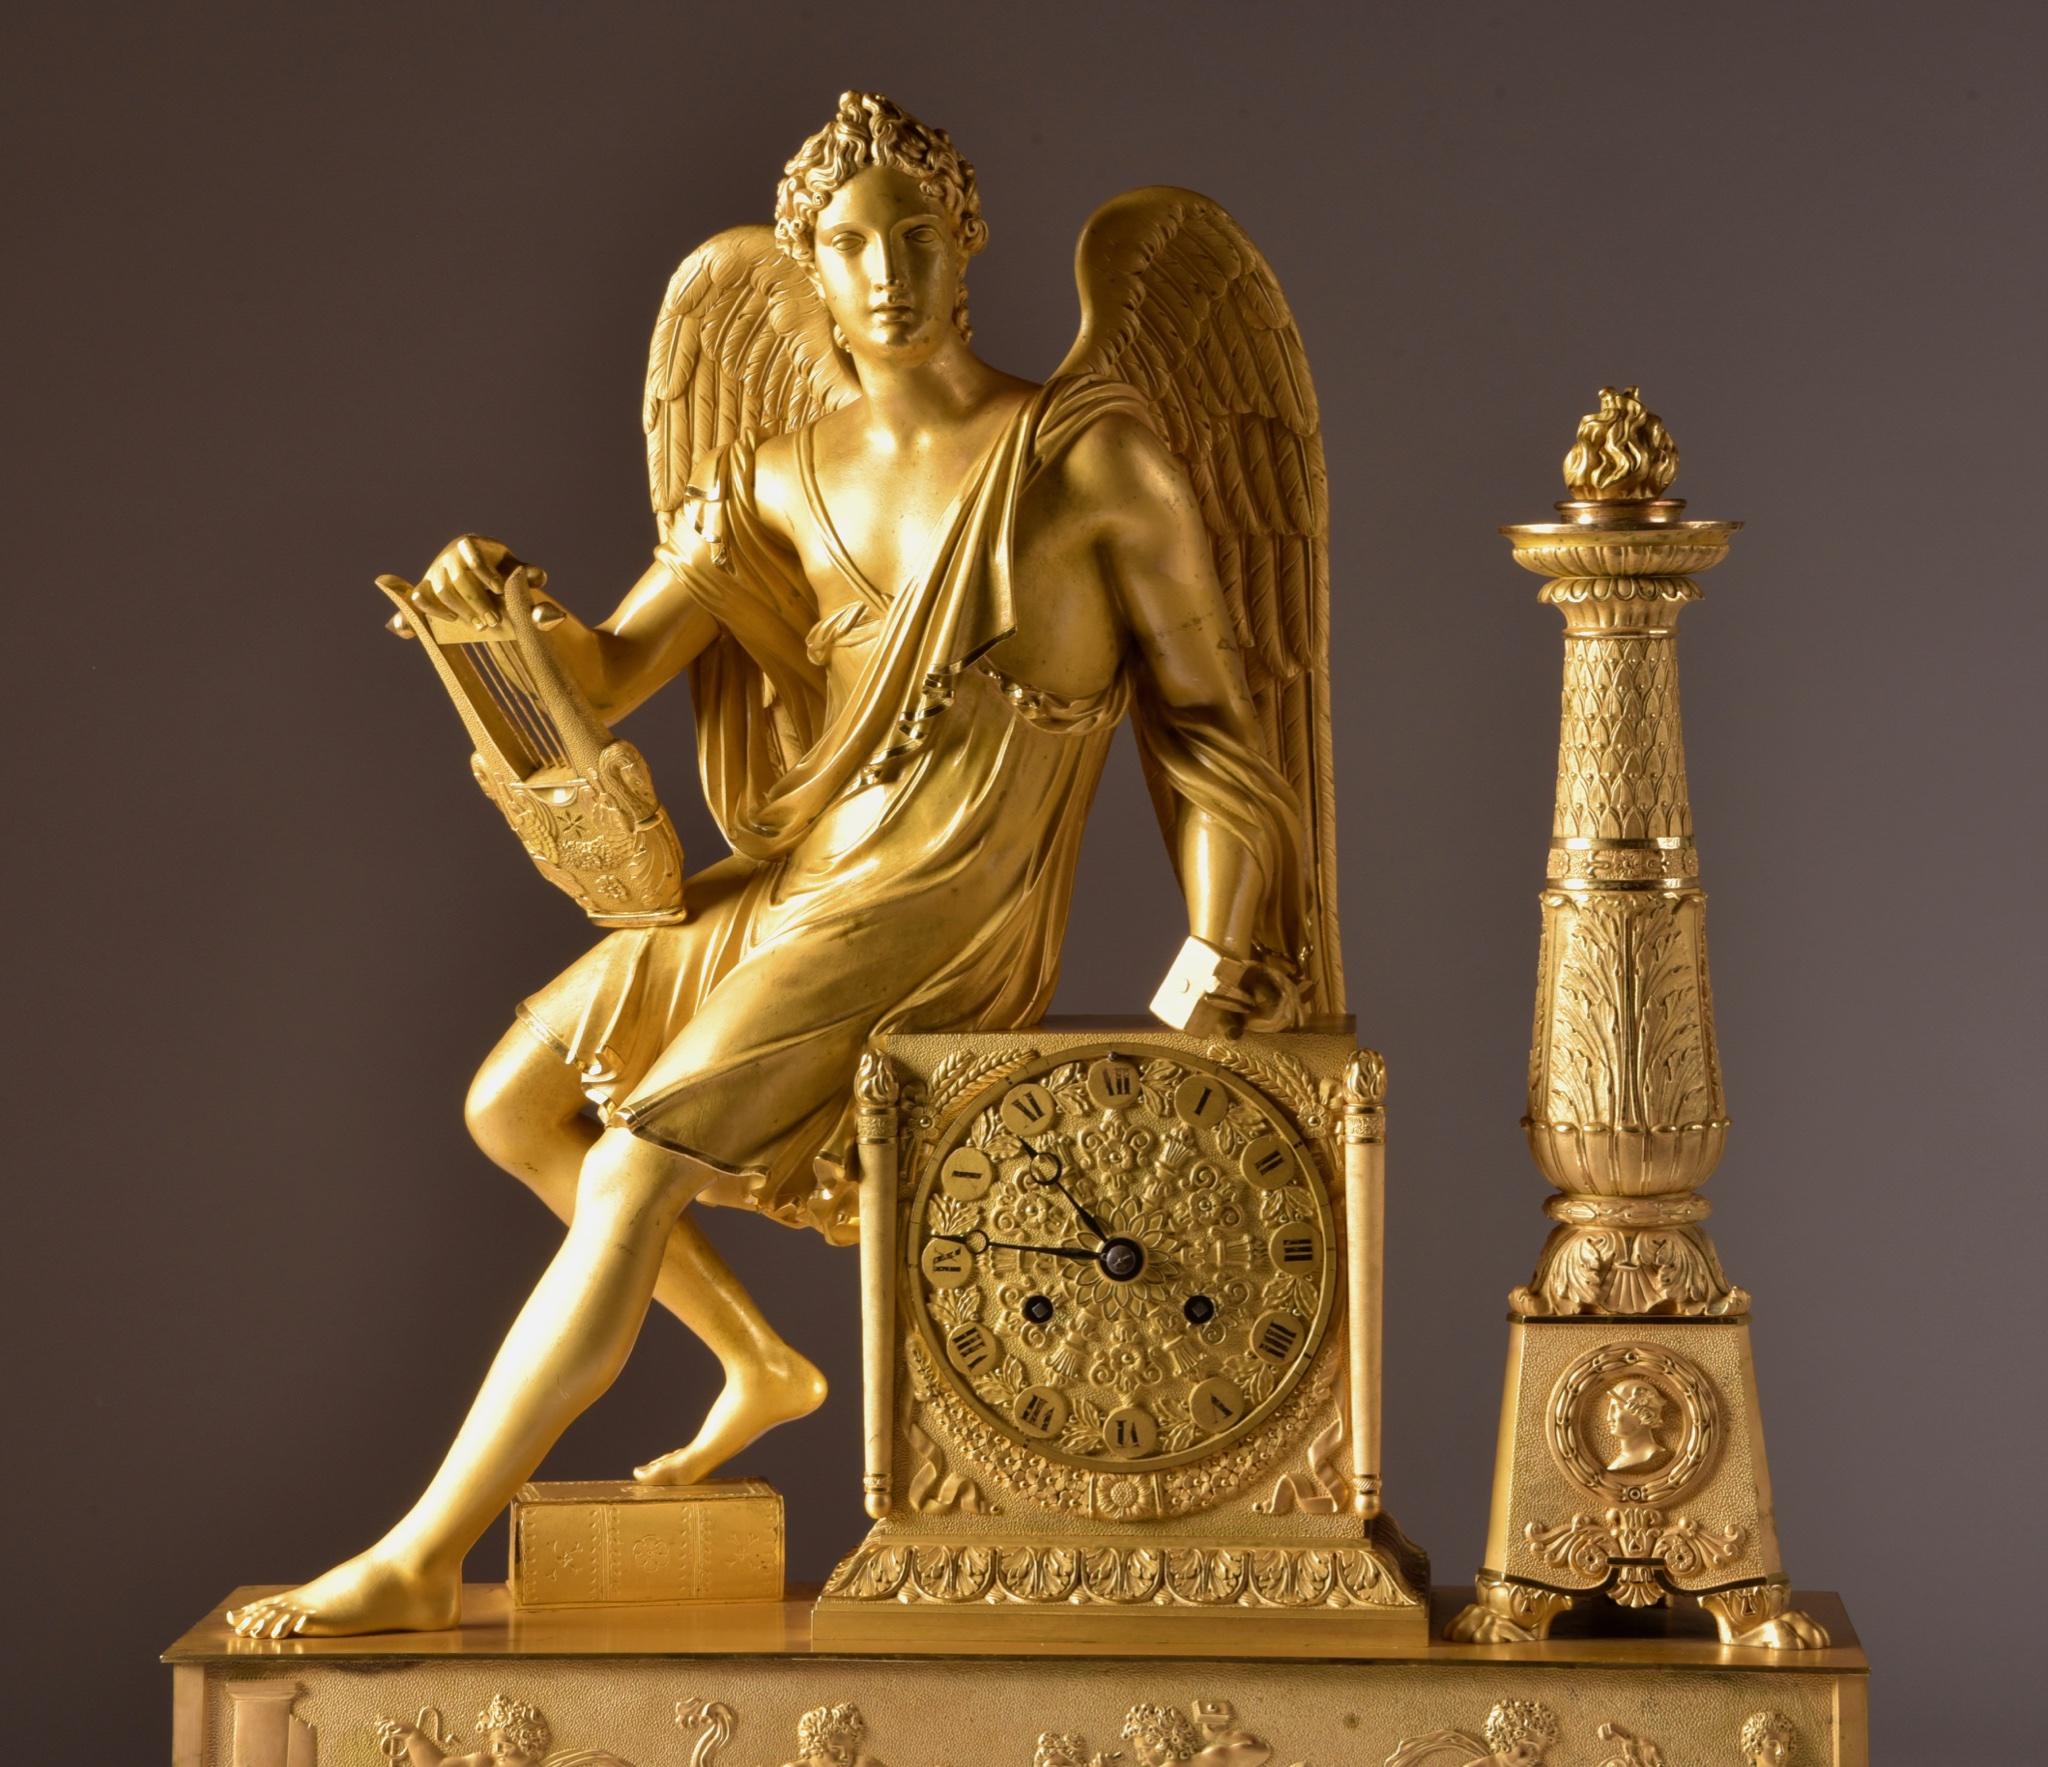 Monumental Empire mantel clock, Apollo and his attribute, very finely finished reliefs. 
Power reserver:	8 day movement
Striking:	half hour, one bell
This clock comes with a pendulum and key. The movement has recently been serviced and it runs